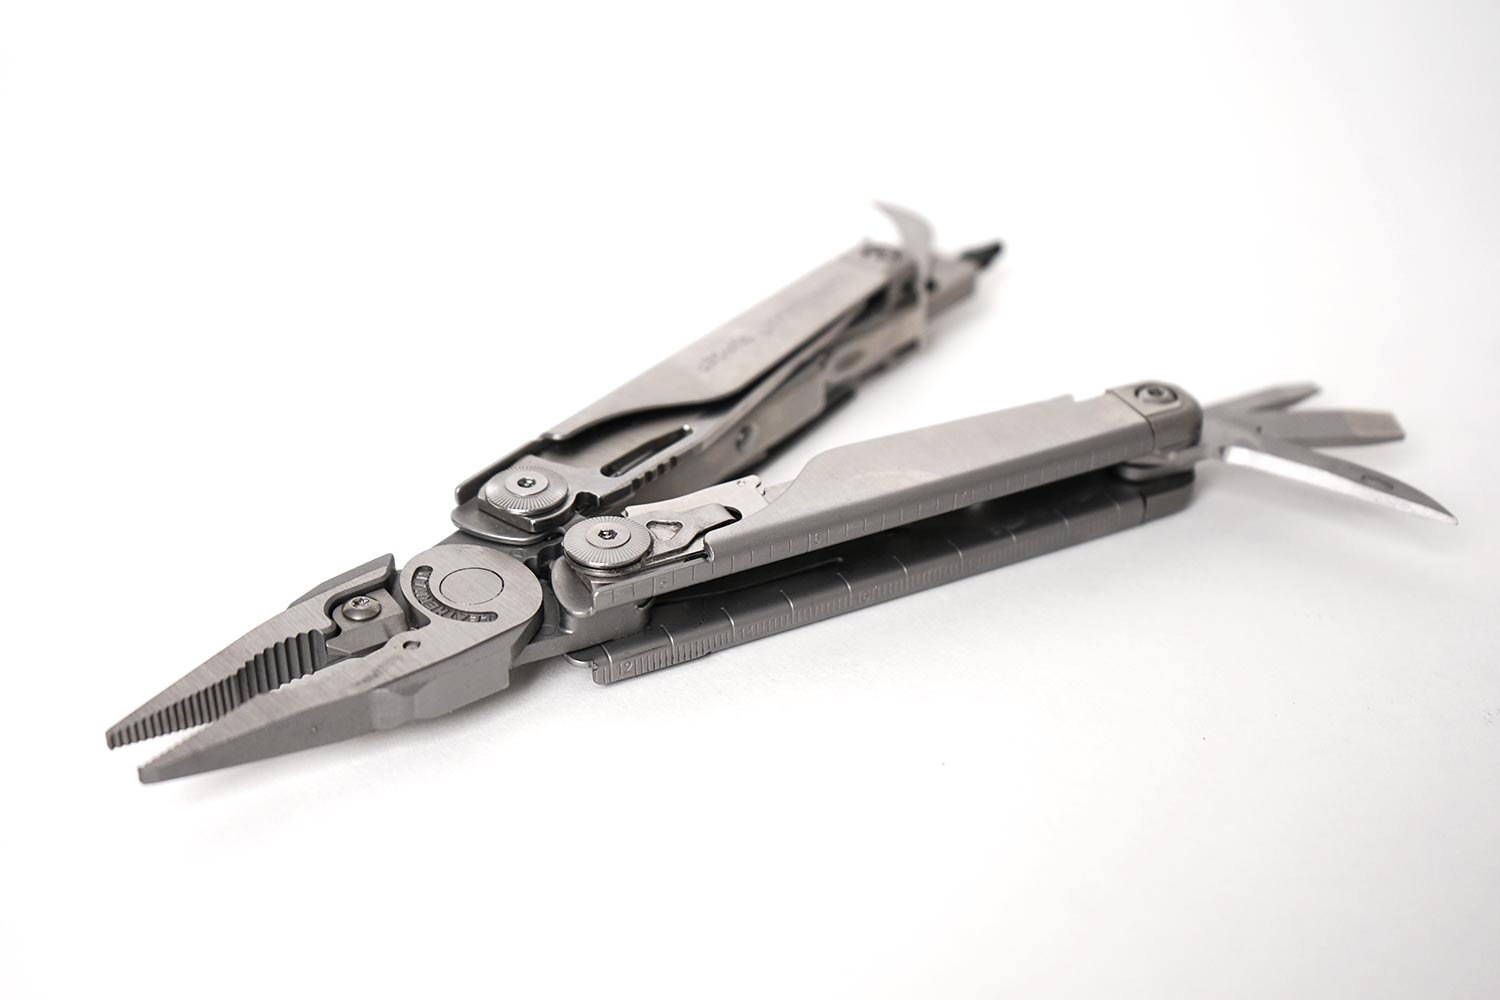 The Leatherman Surge, one of the gear brand's best-selling multitools